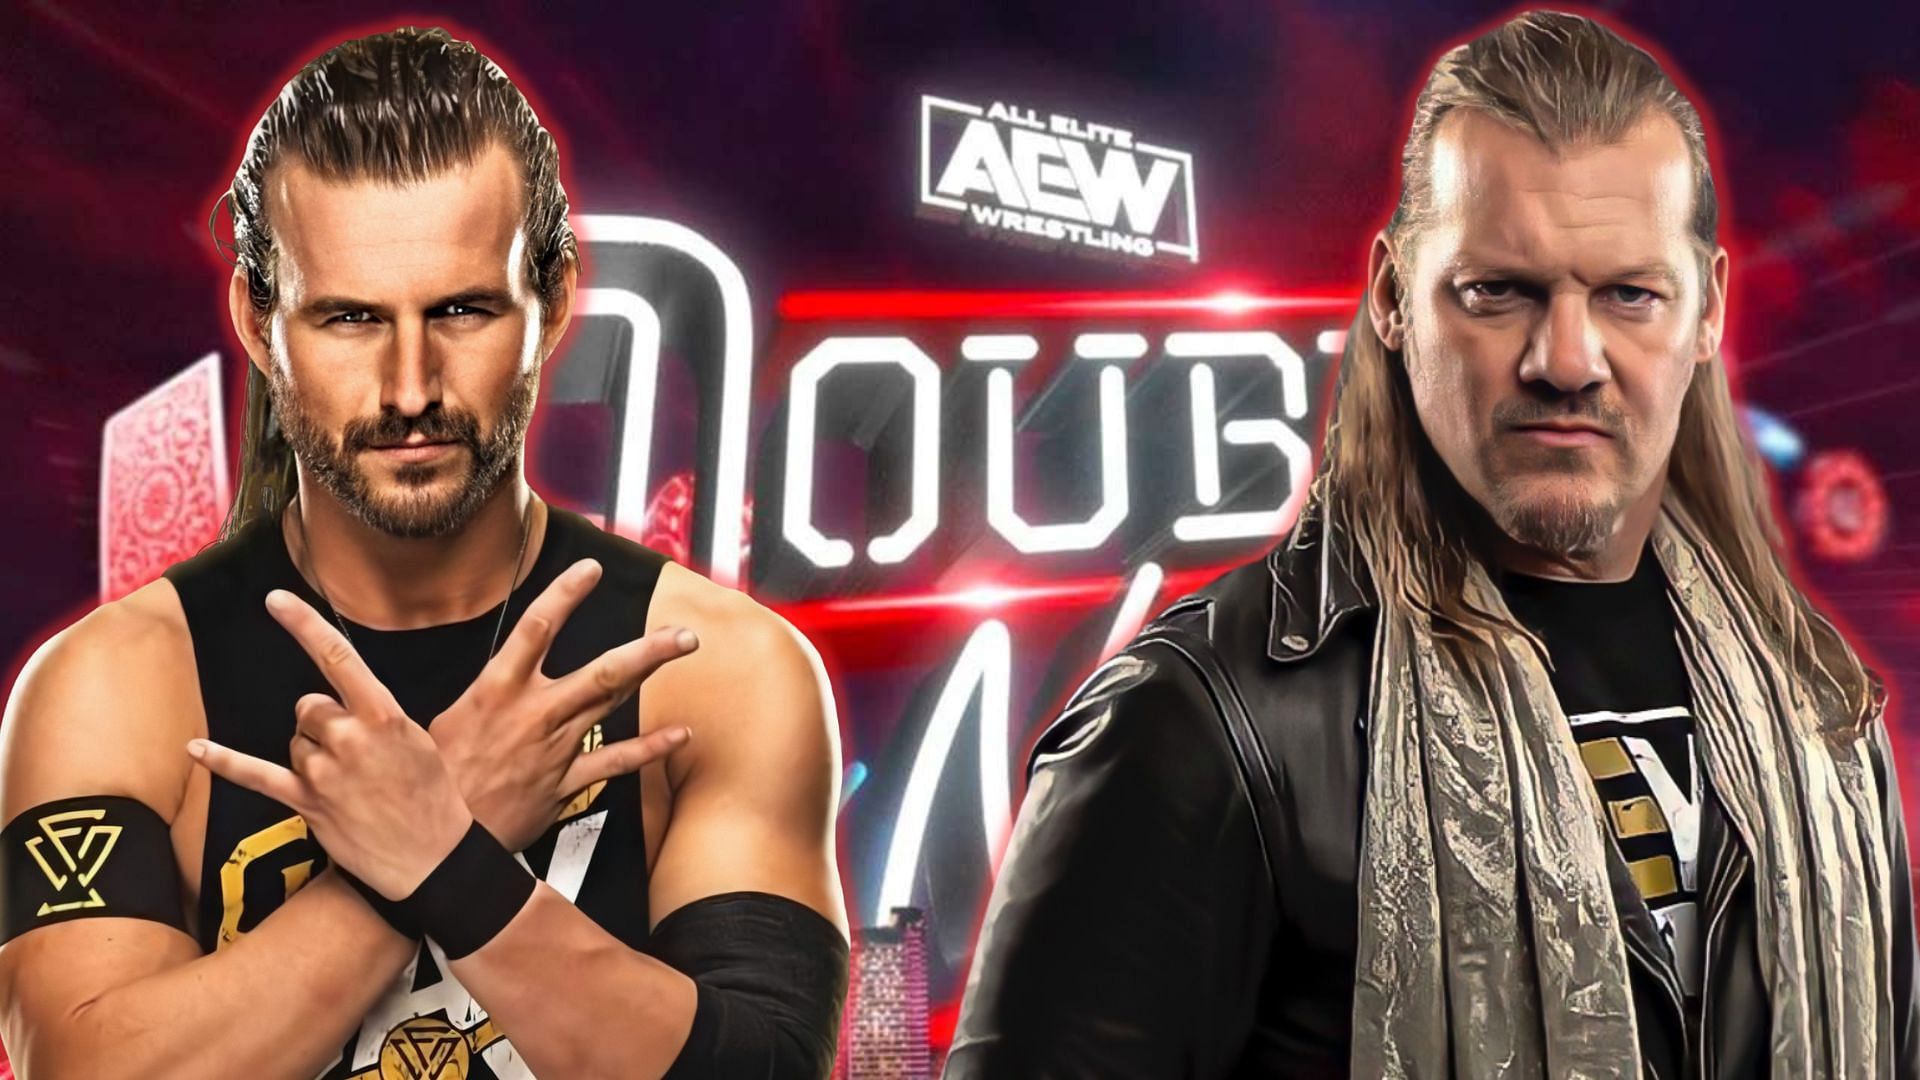 Adam Cole and Chris Jericho had an intense match at Double or Nothing!